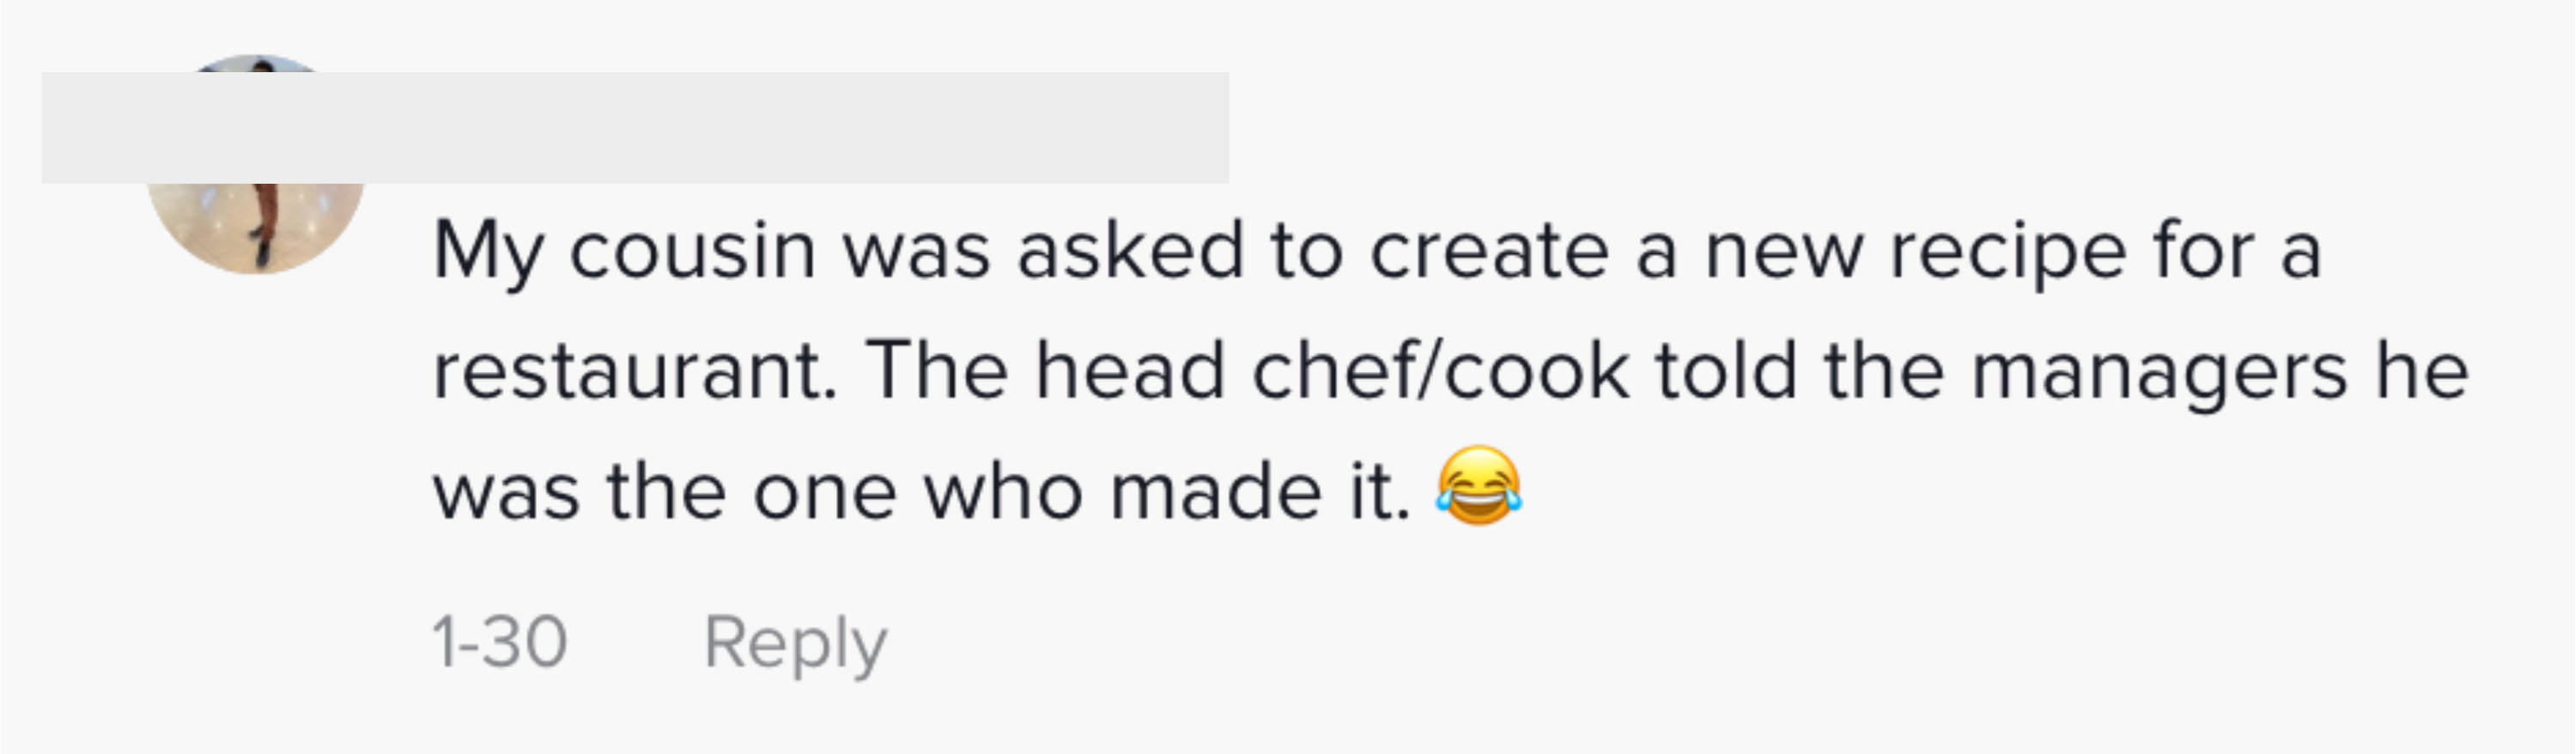 My cousin was asked to create a new recipe for a restaurant. The head chef/cook told the managers he was the one who made it